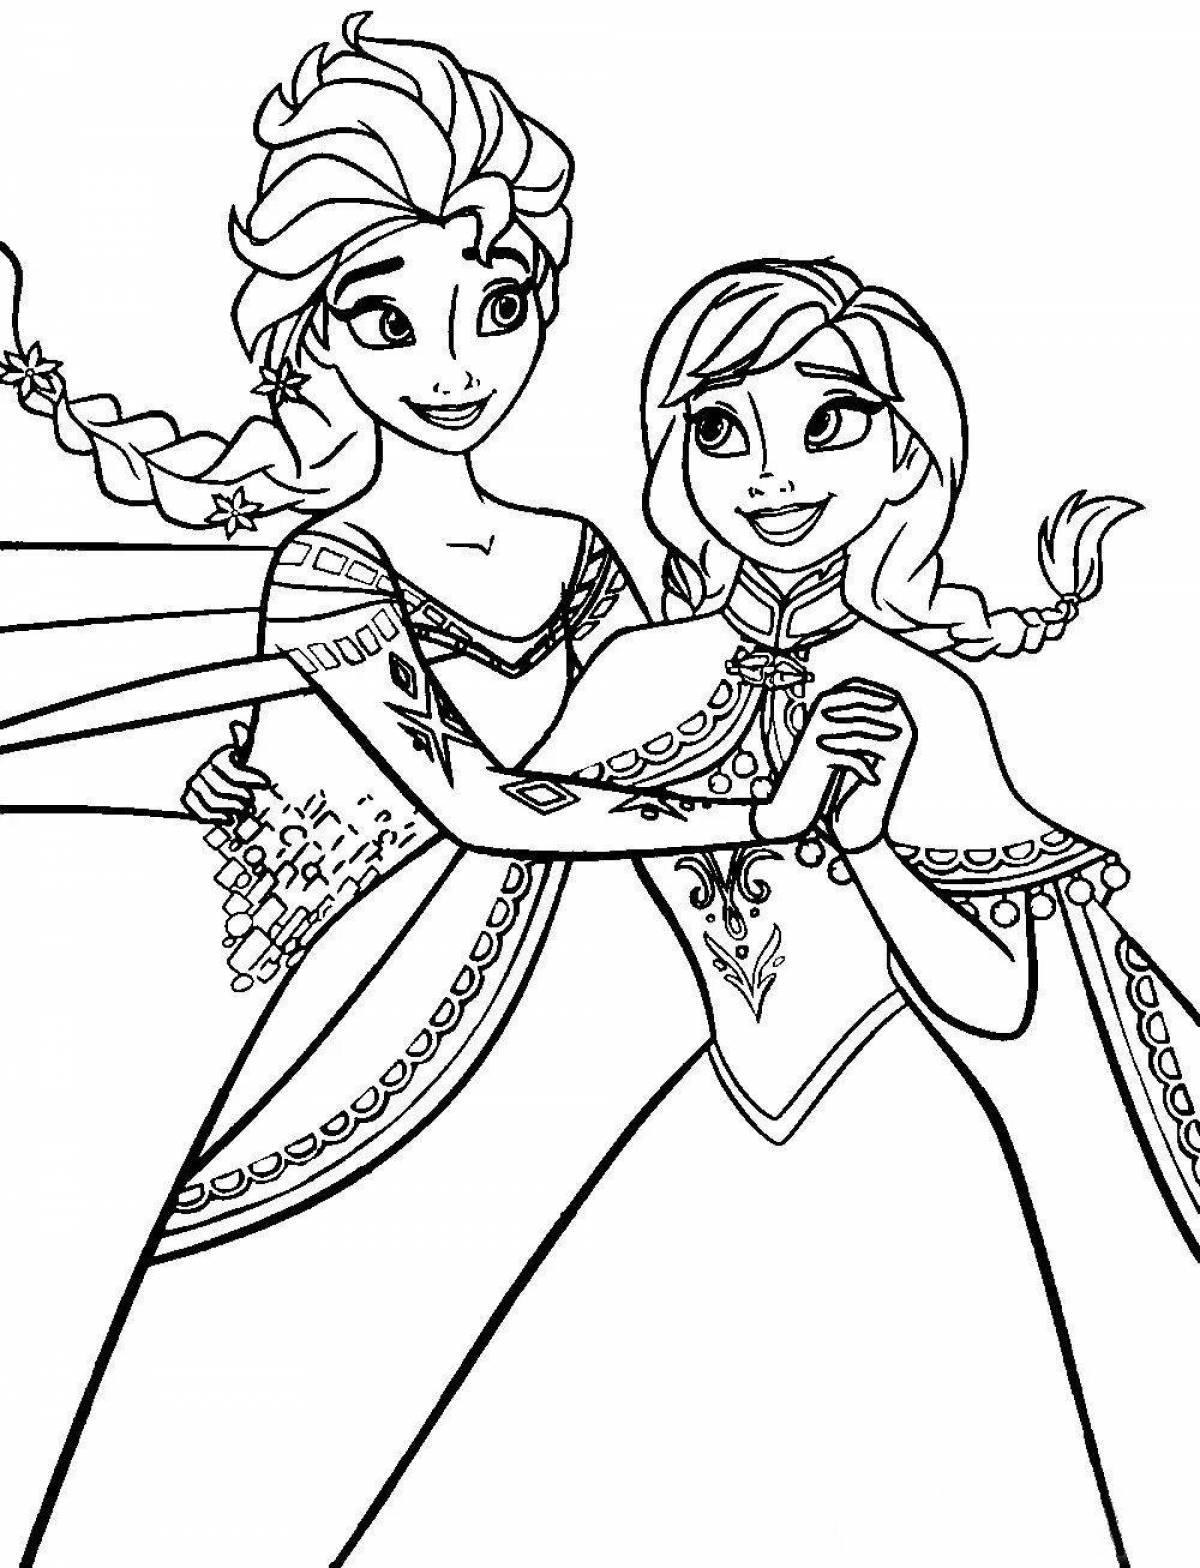 Great elsa coloring book for kids 6-7 years old